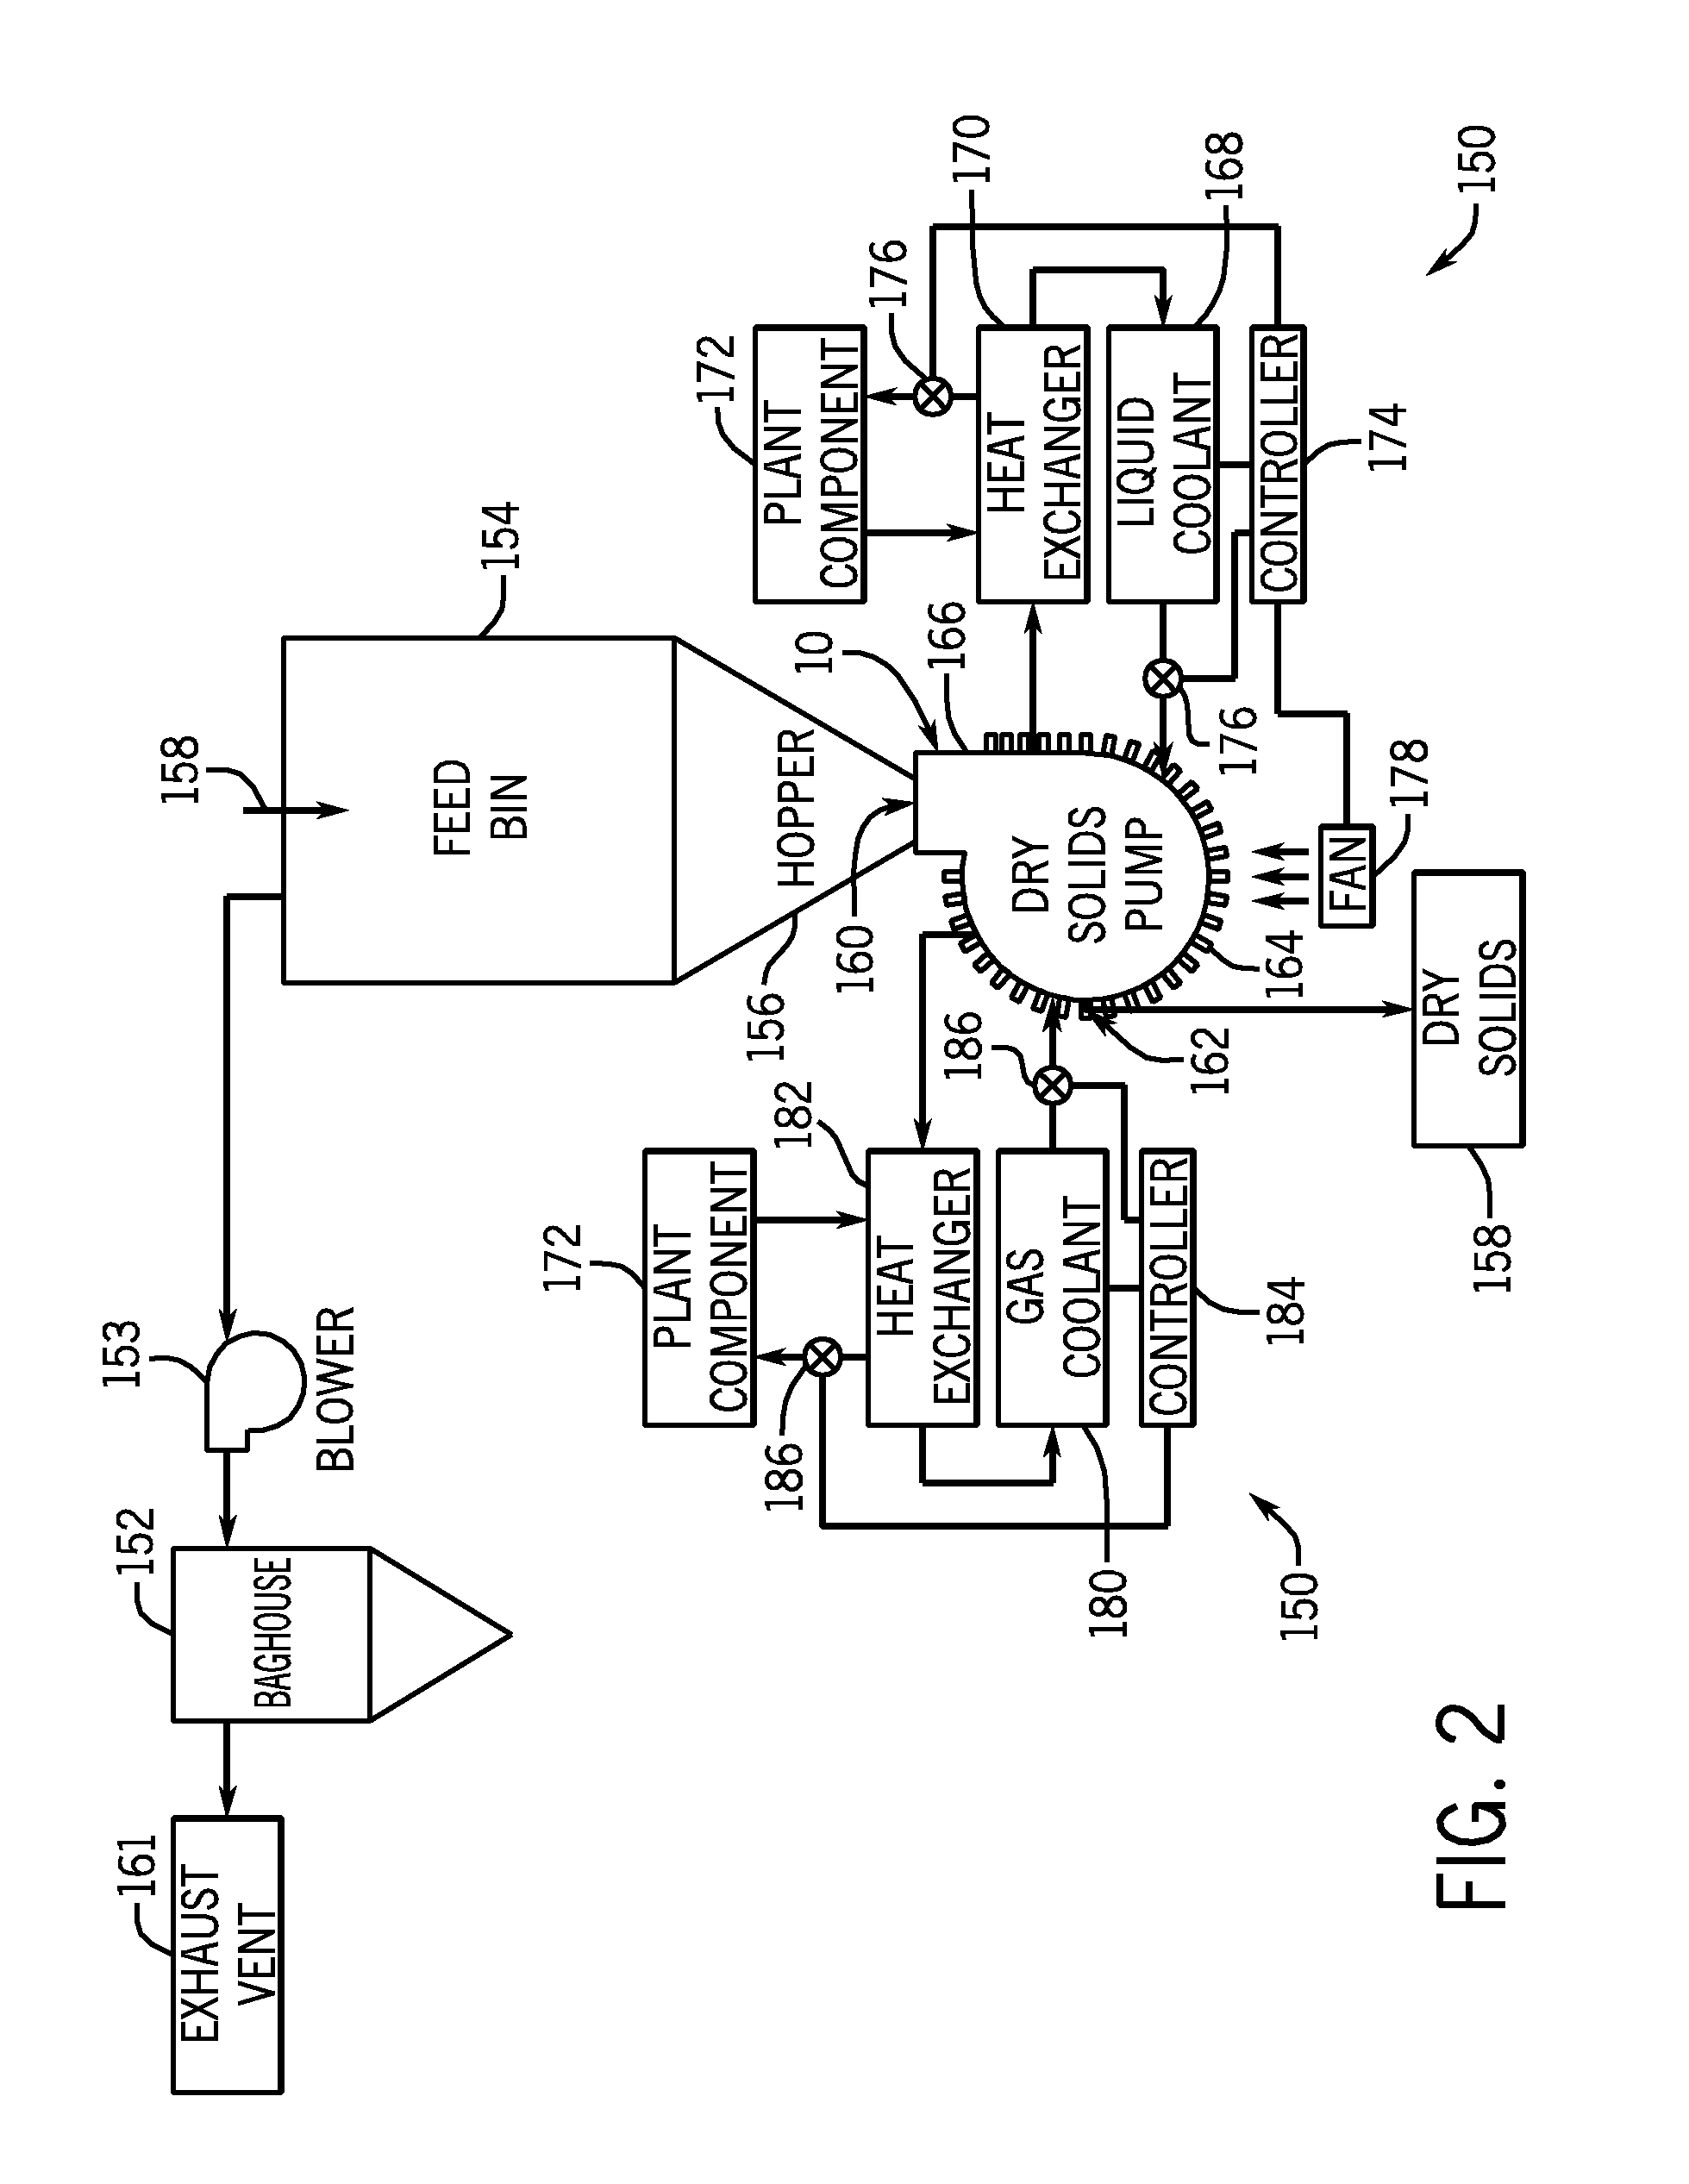 System for thermally controlling a solid feed pump